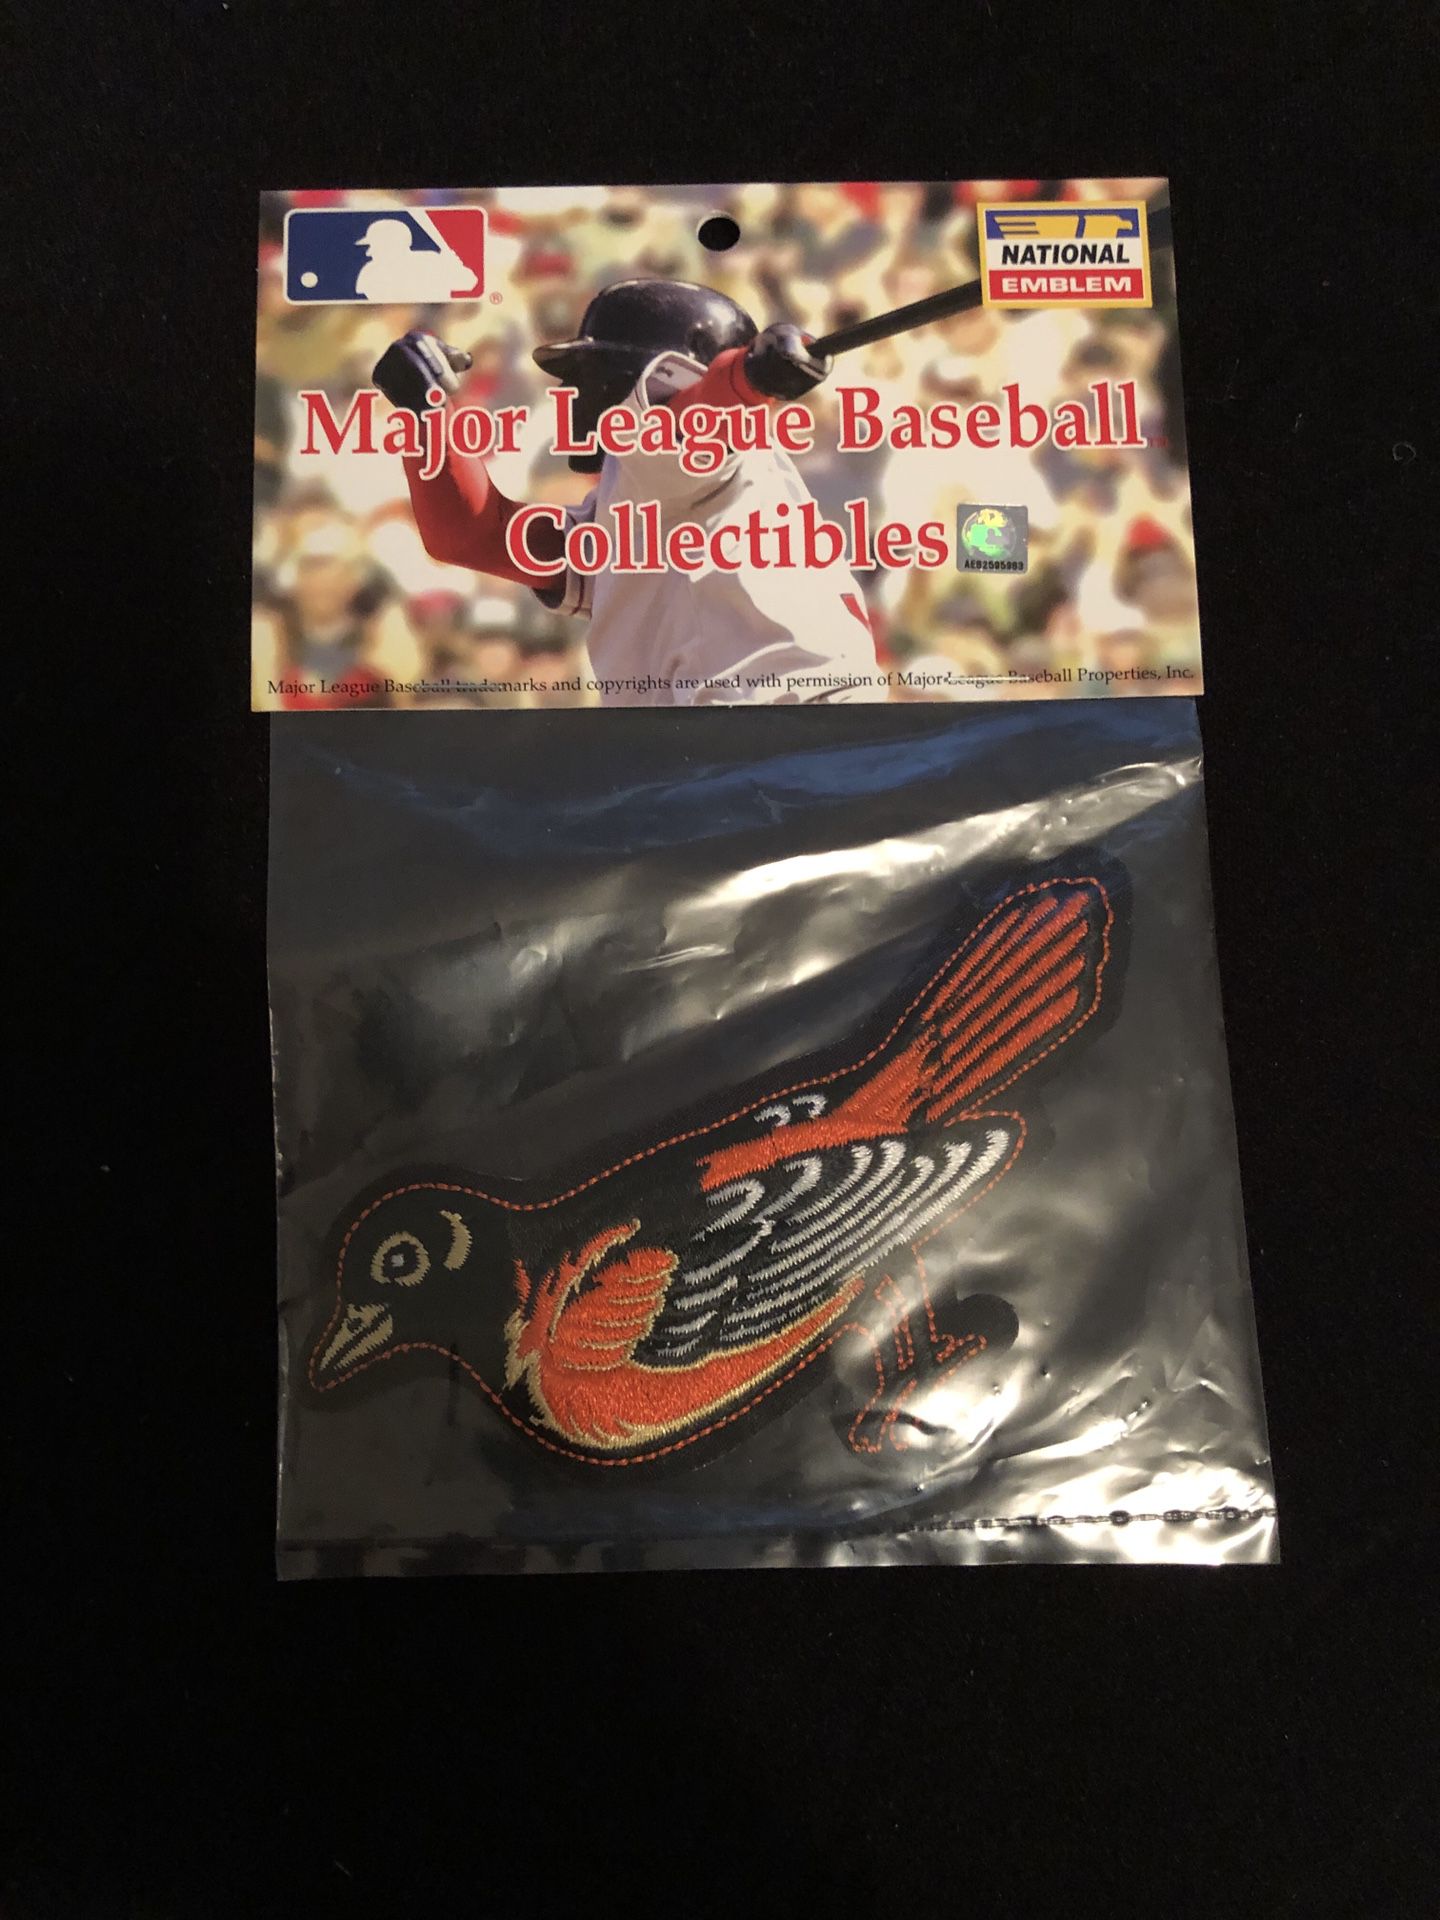 Baltimore Orioles Embroidered Patch! Great for Framing and Sewing on Jackets!